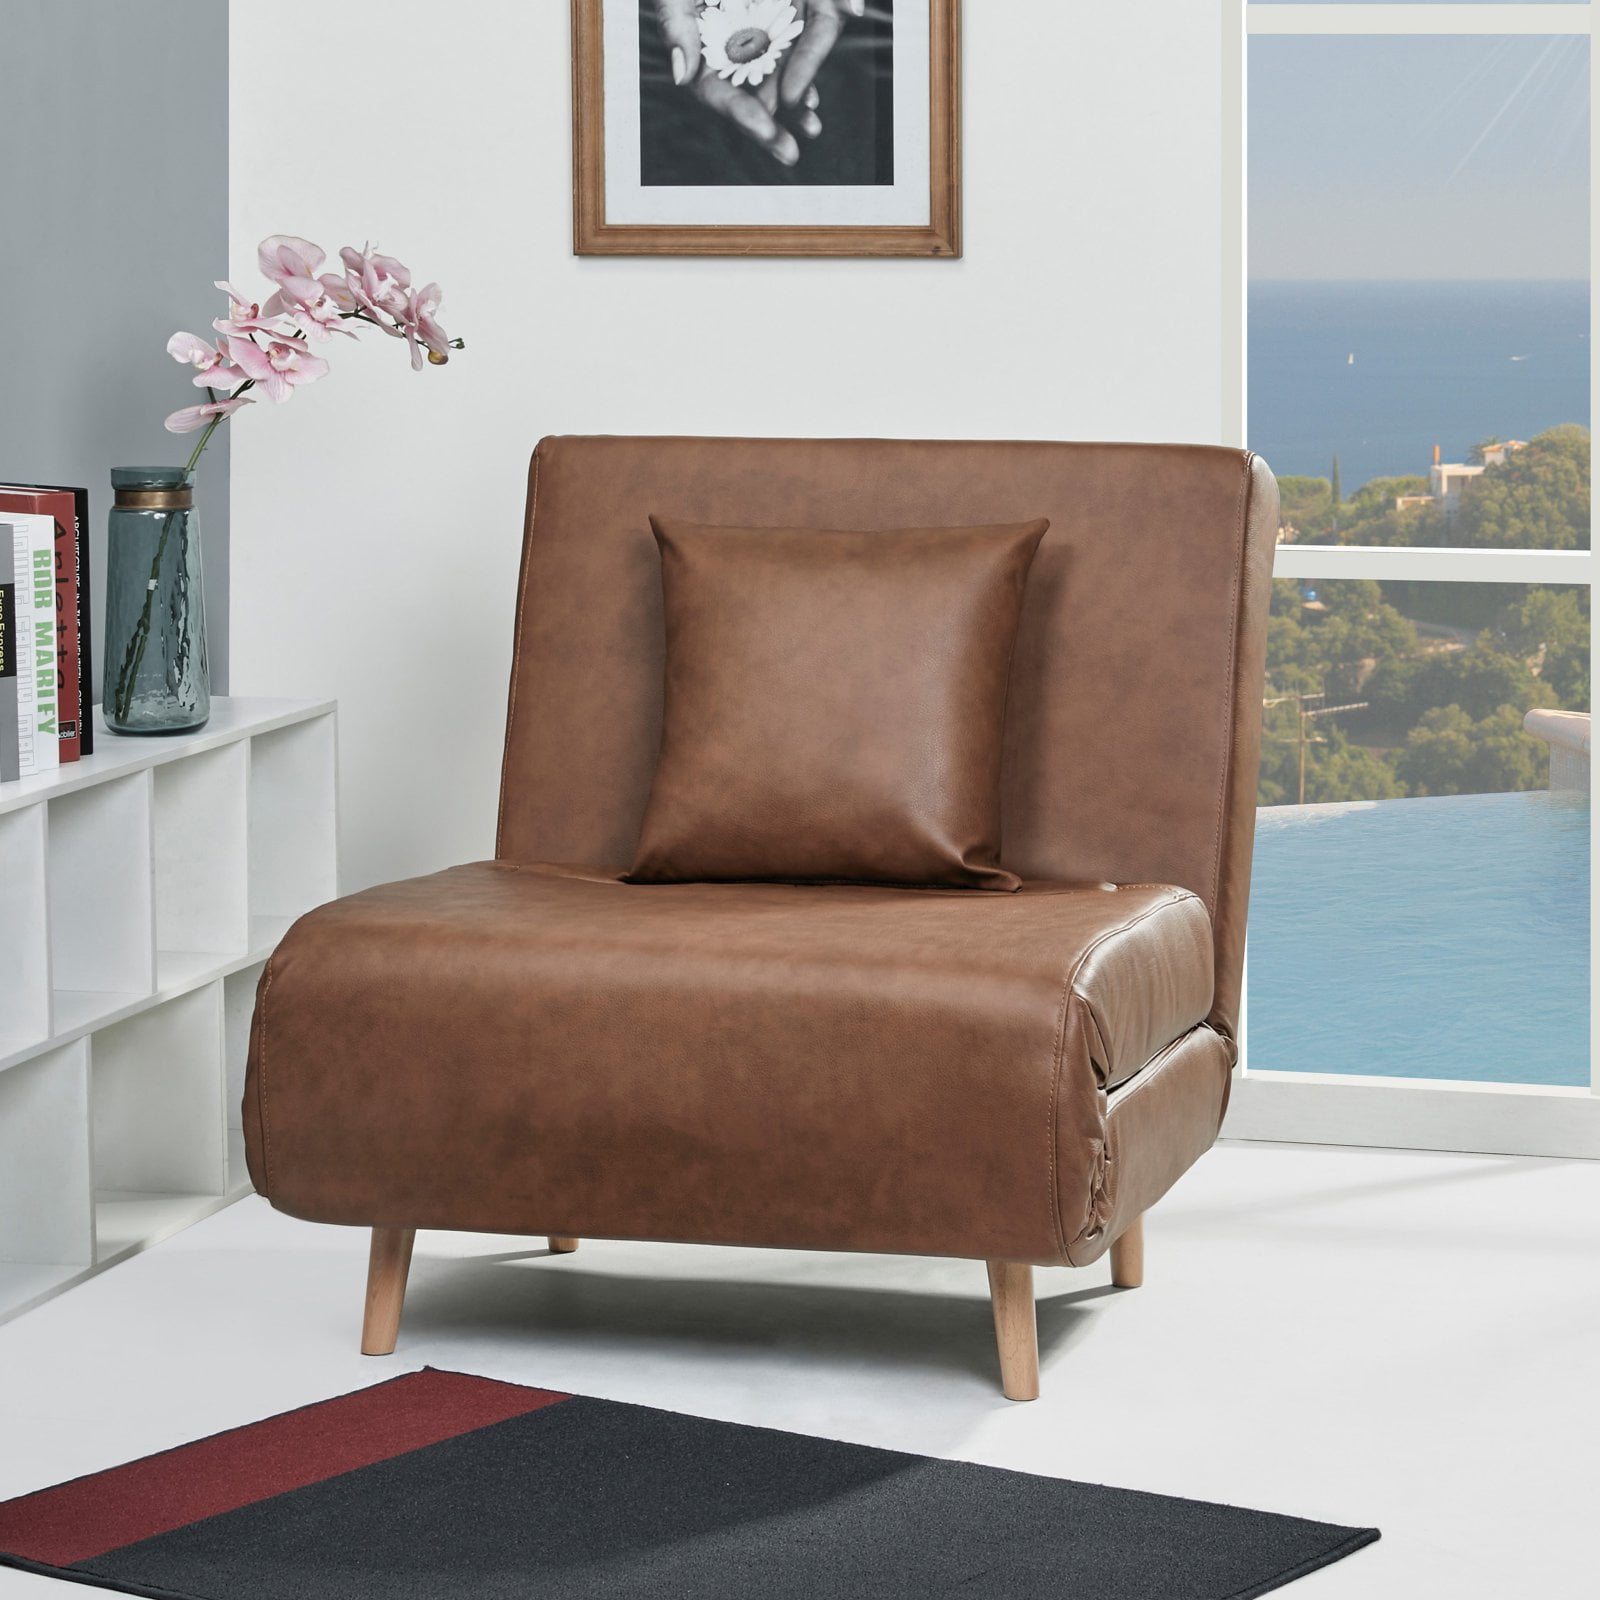 Vista Faux Leather Convertible Chair, Leather Chair Sleeper